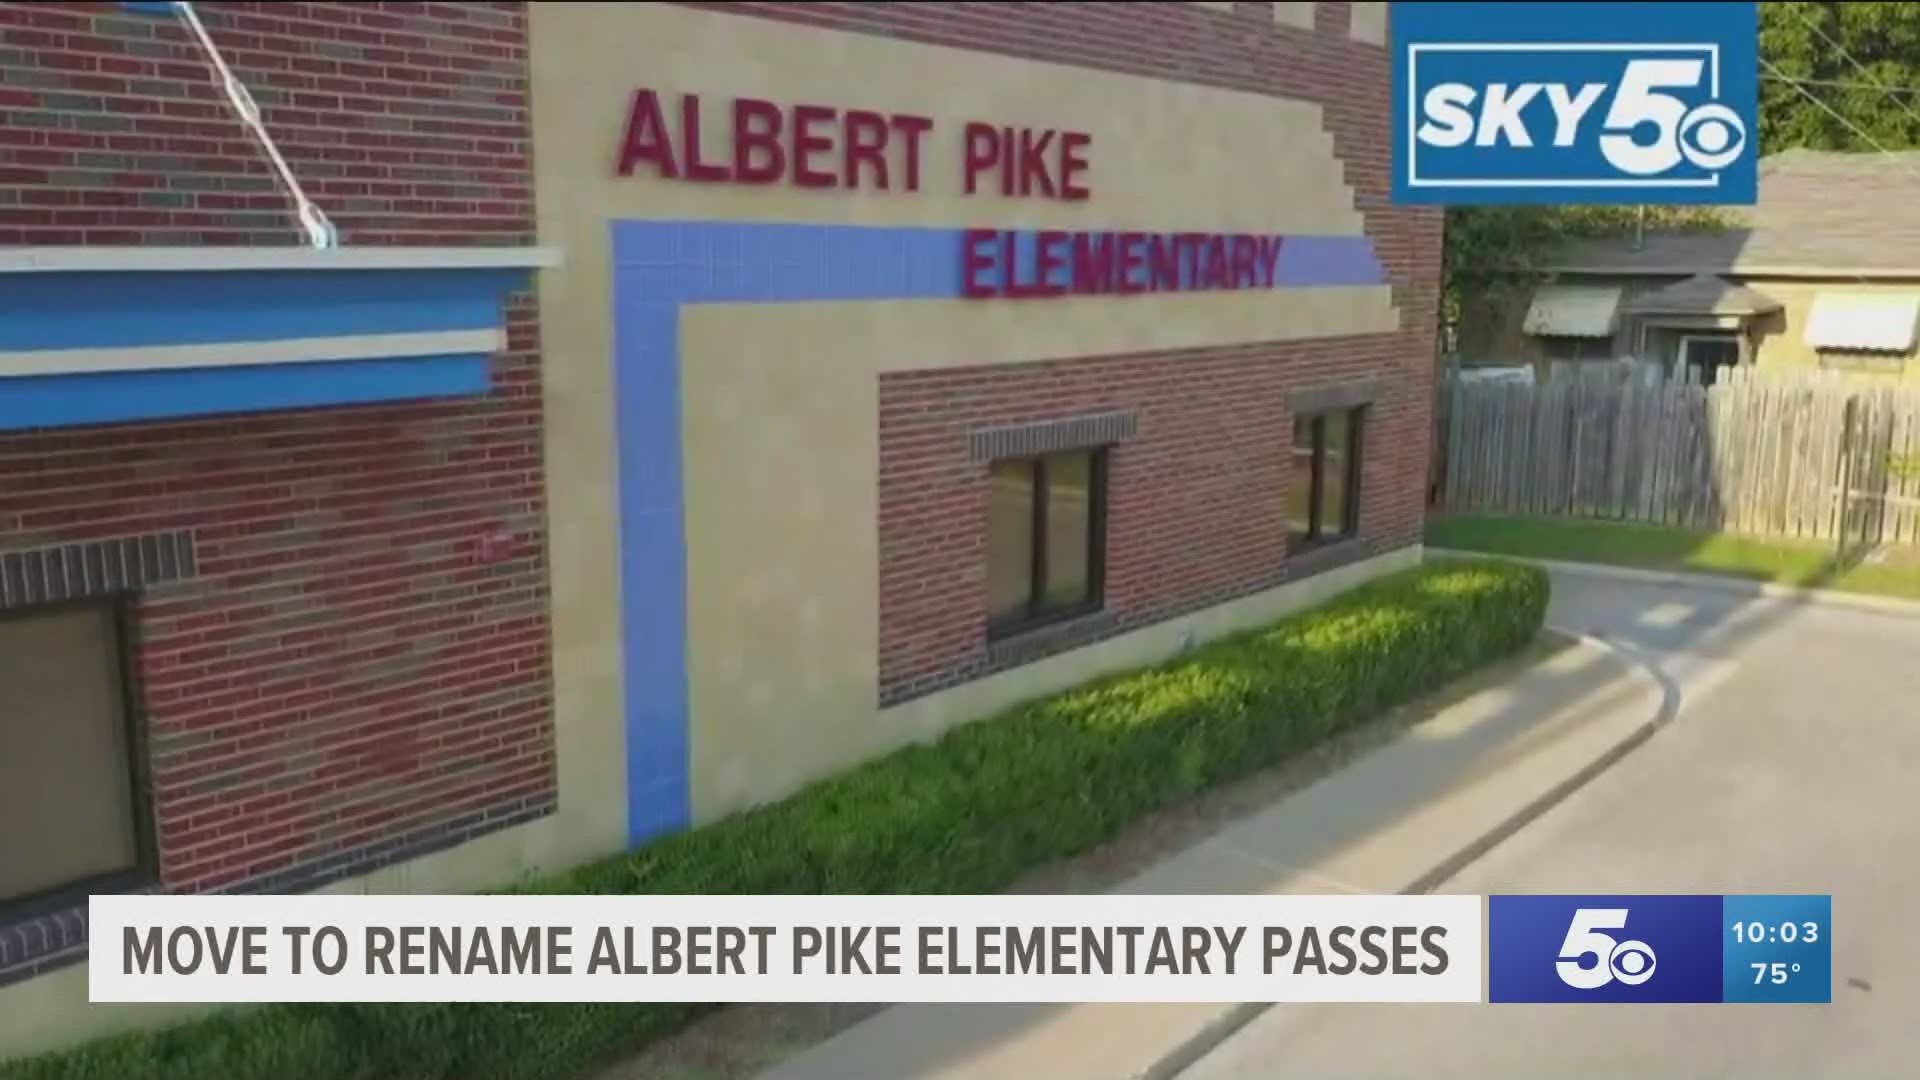 The school board decided to pass a resolution with a vote of 7-0 that shows their intentions to change the name of Albert Pike Elementary. https://bit.ly/32kbGUE